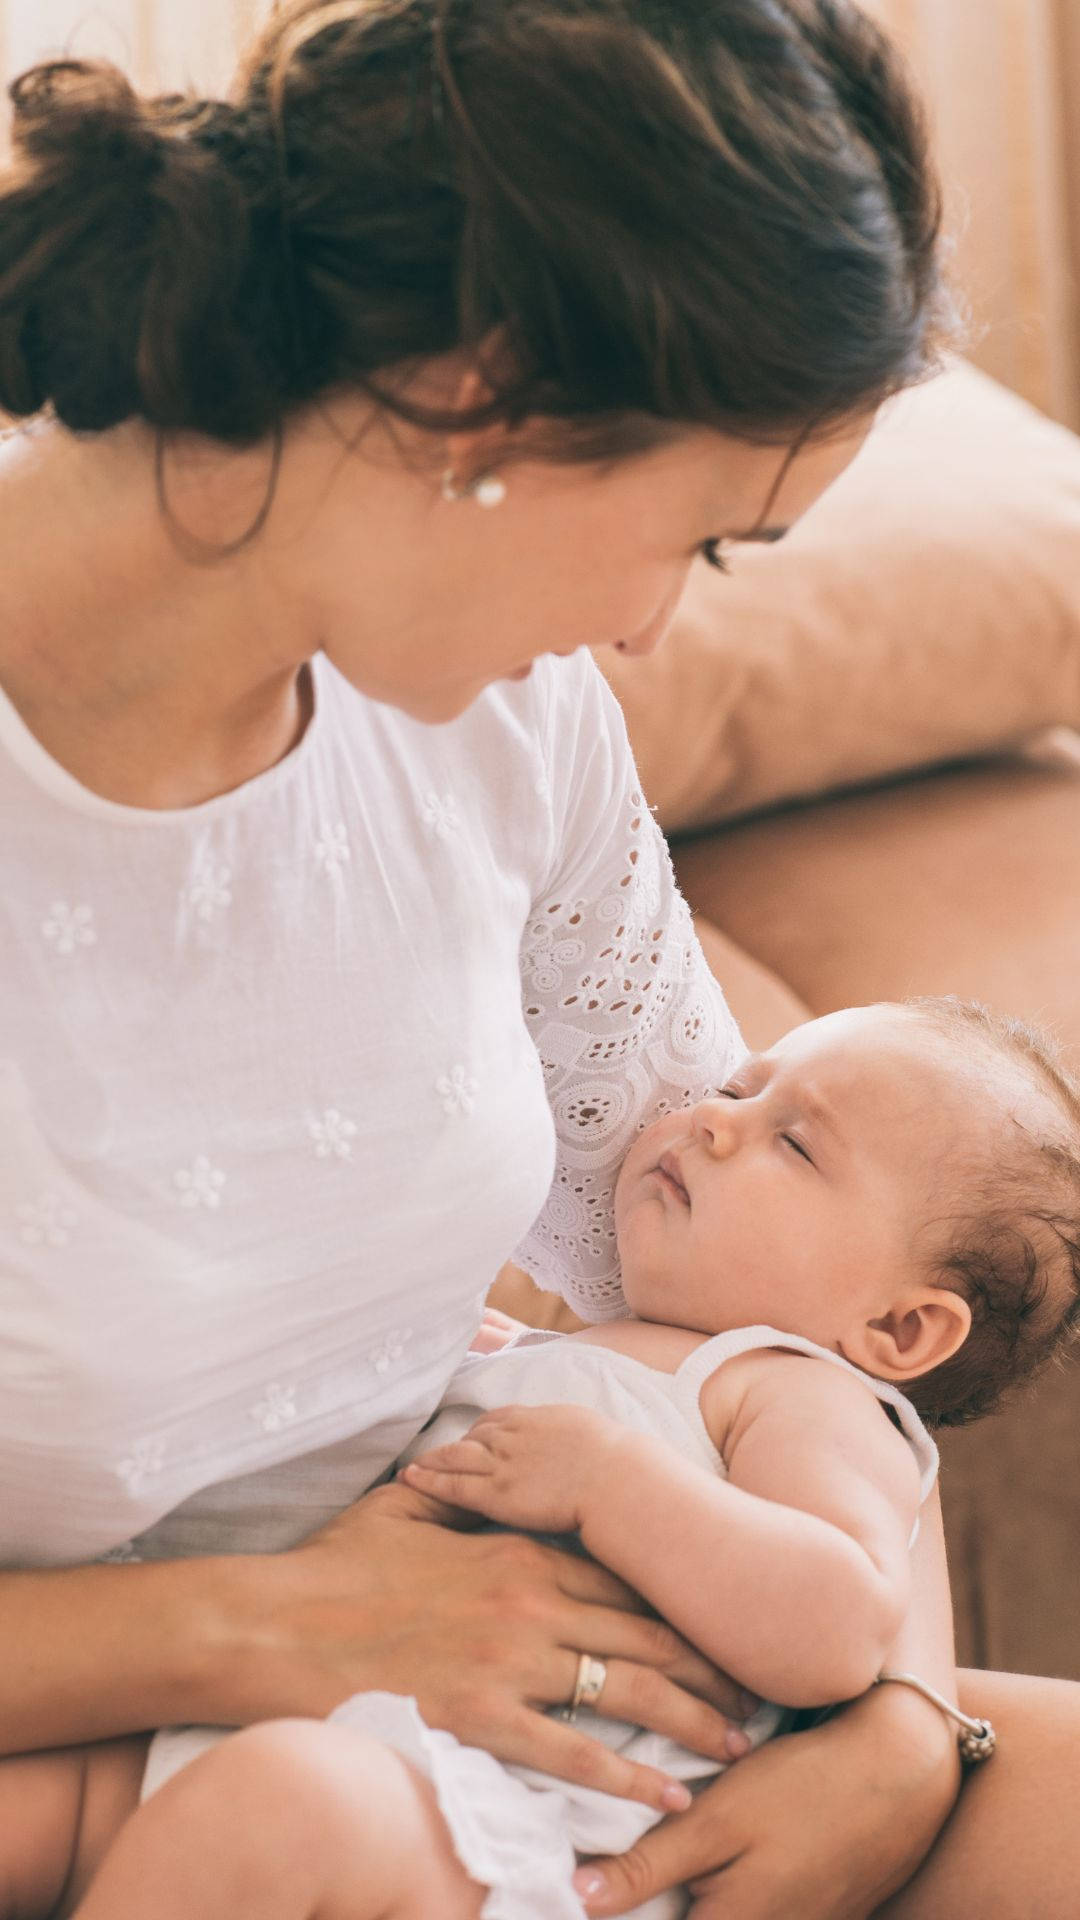 Mom With Sleeping Baby Background